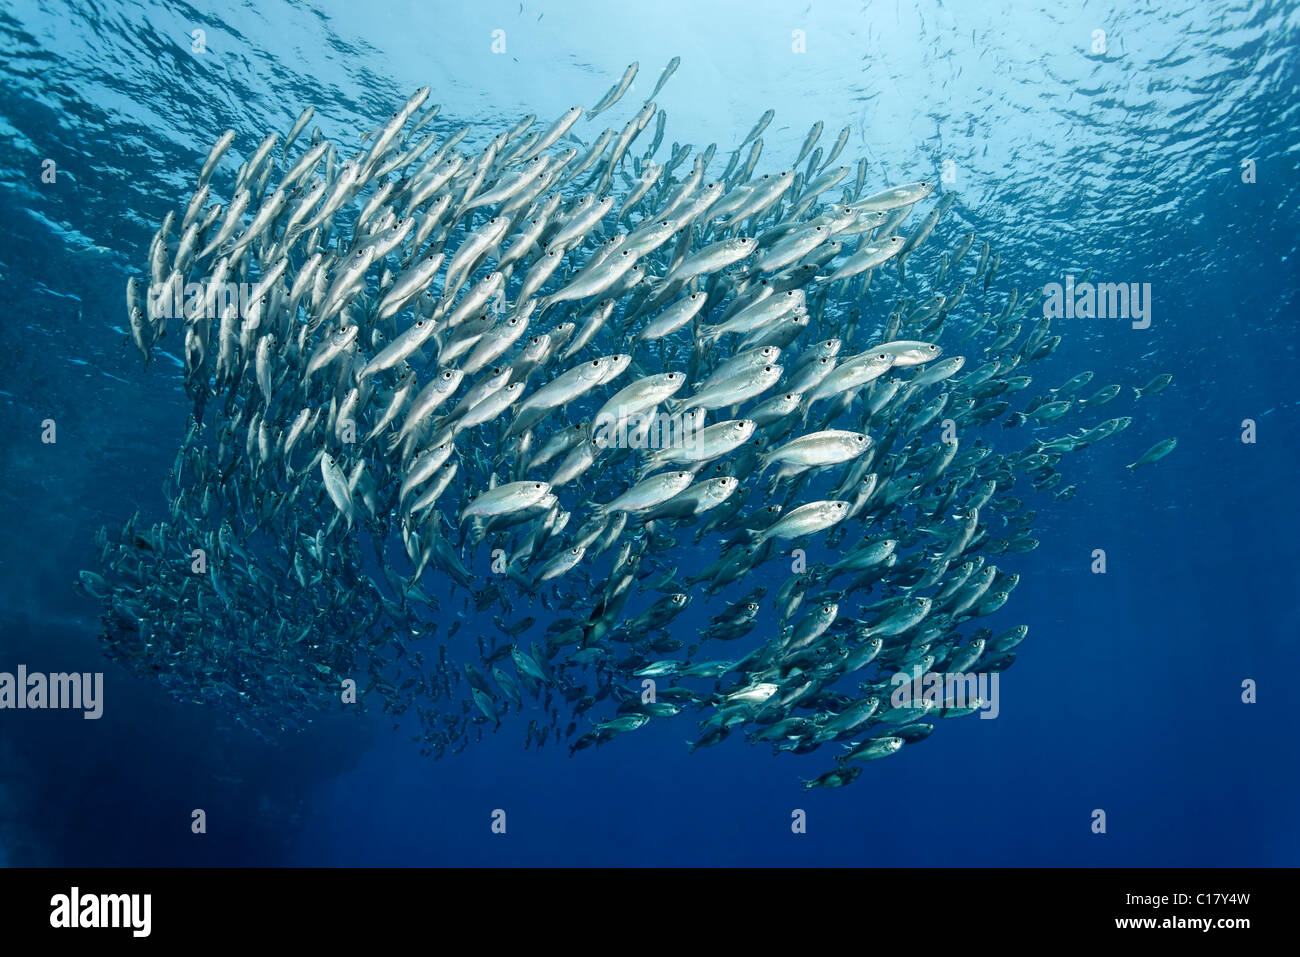 A shoal of Five-Barr-Tail-Fishes (Kuhlia mugil) swimming in open water, Hurghada, Brother Islands, Red Sea, Egypt, Africa Stock Photo